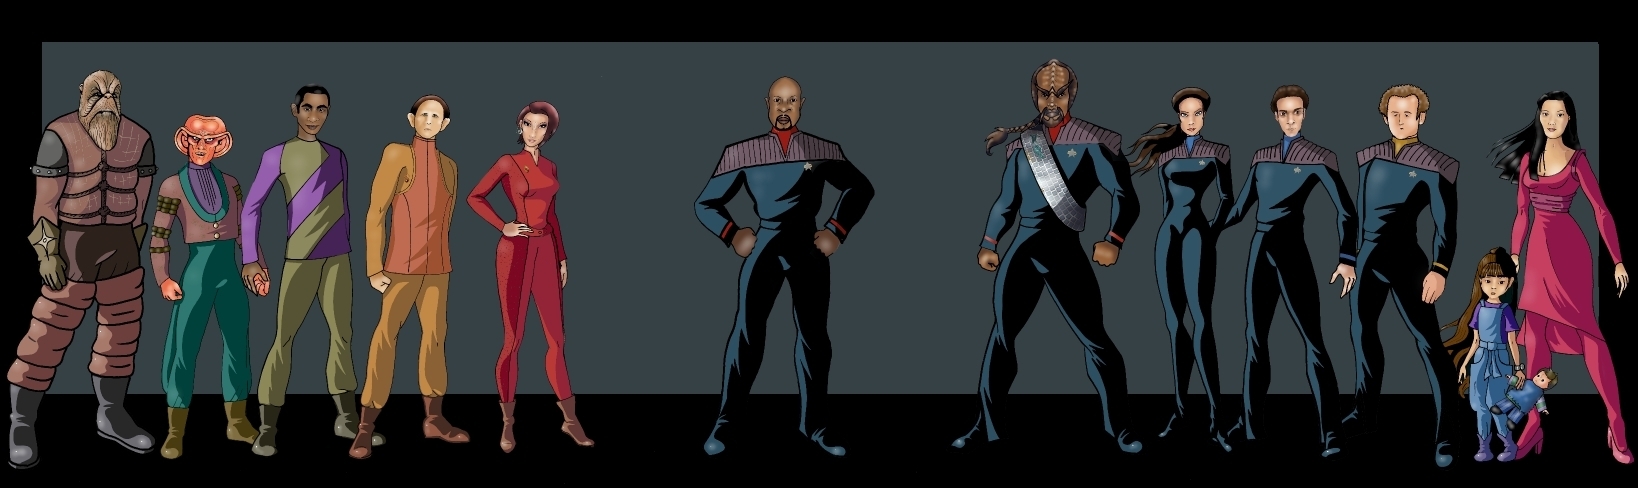 DS9 characters